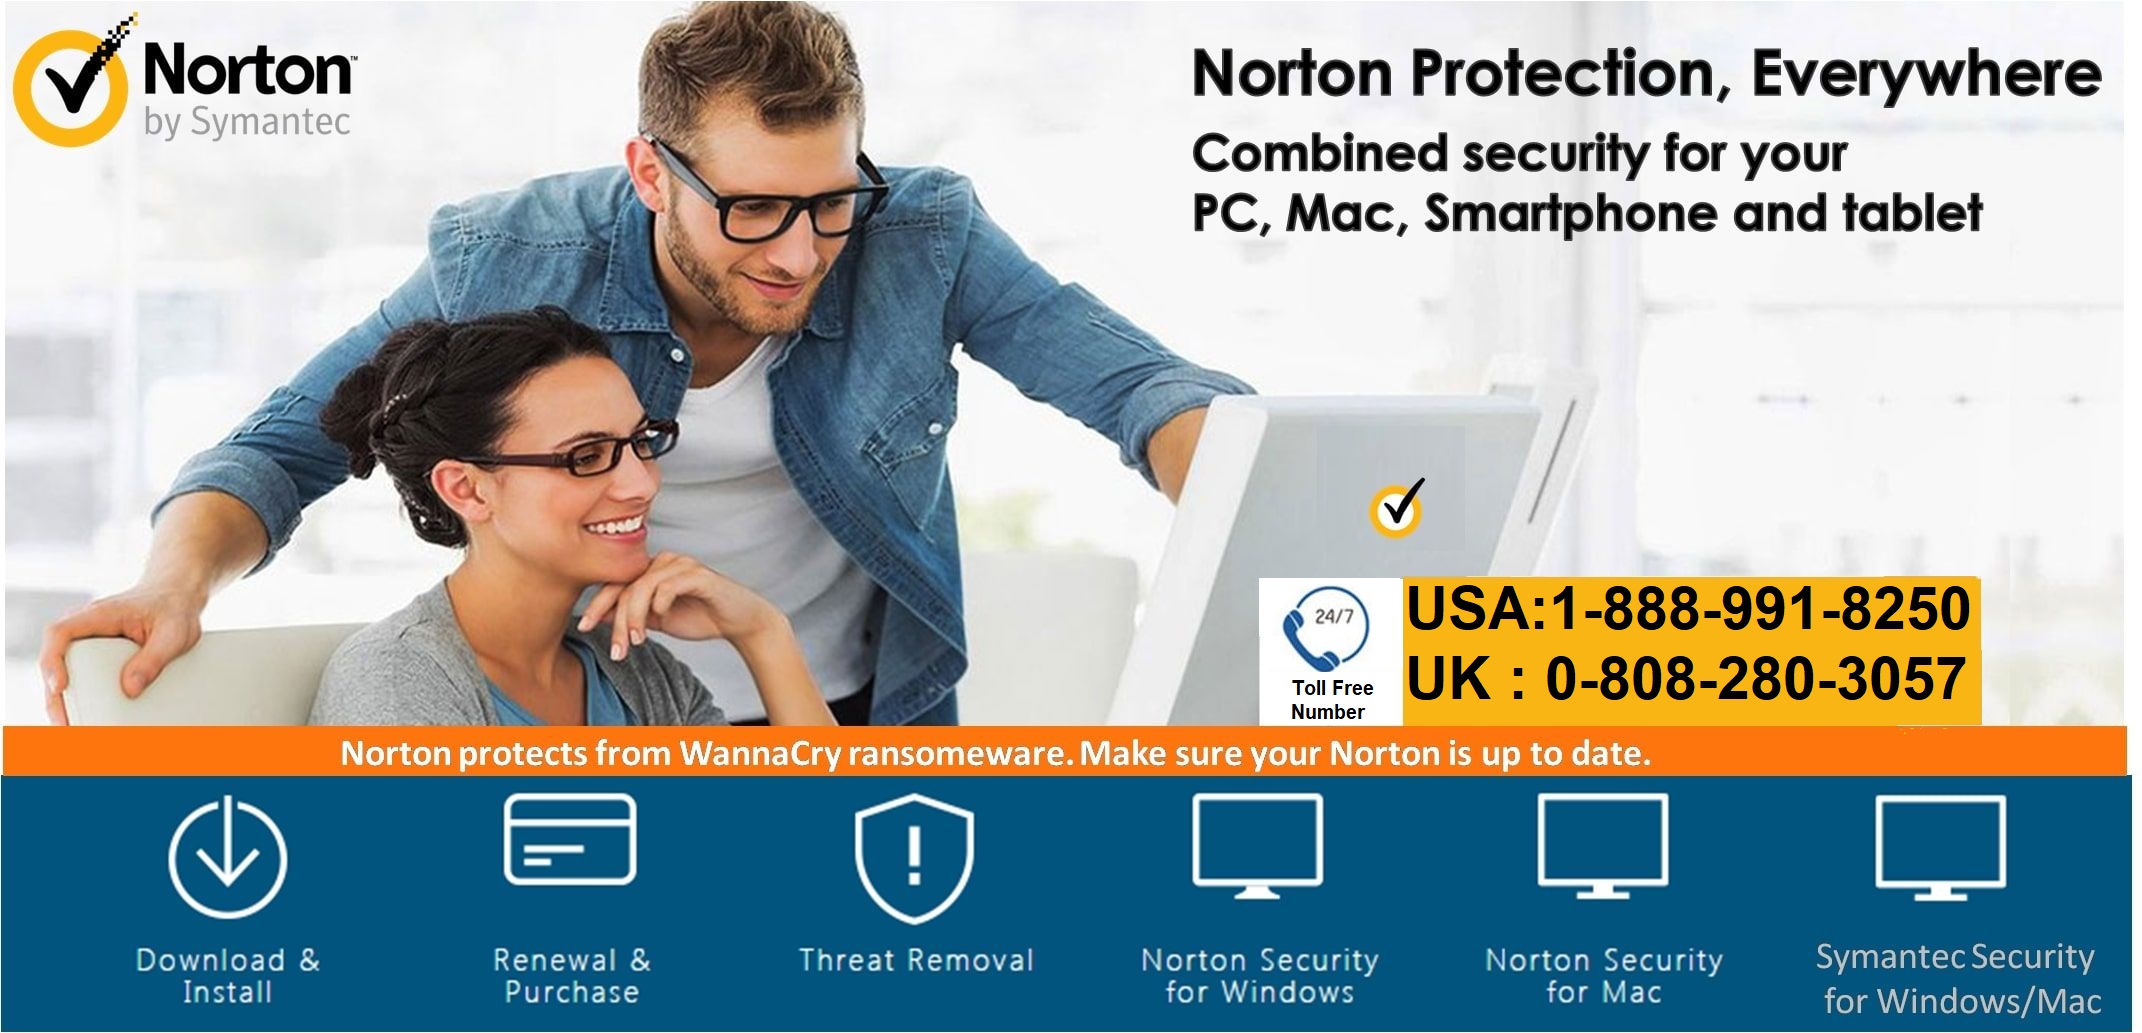 transferring norton to a new computer